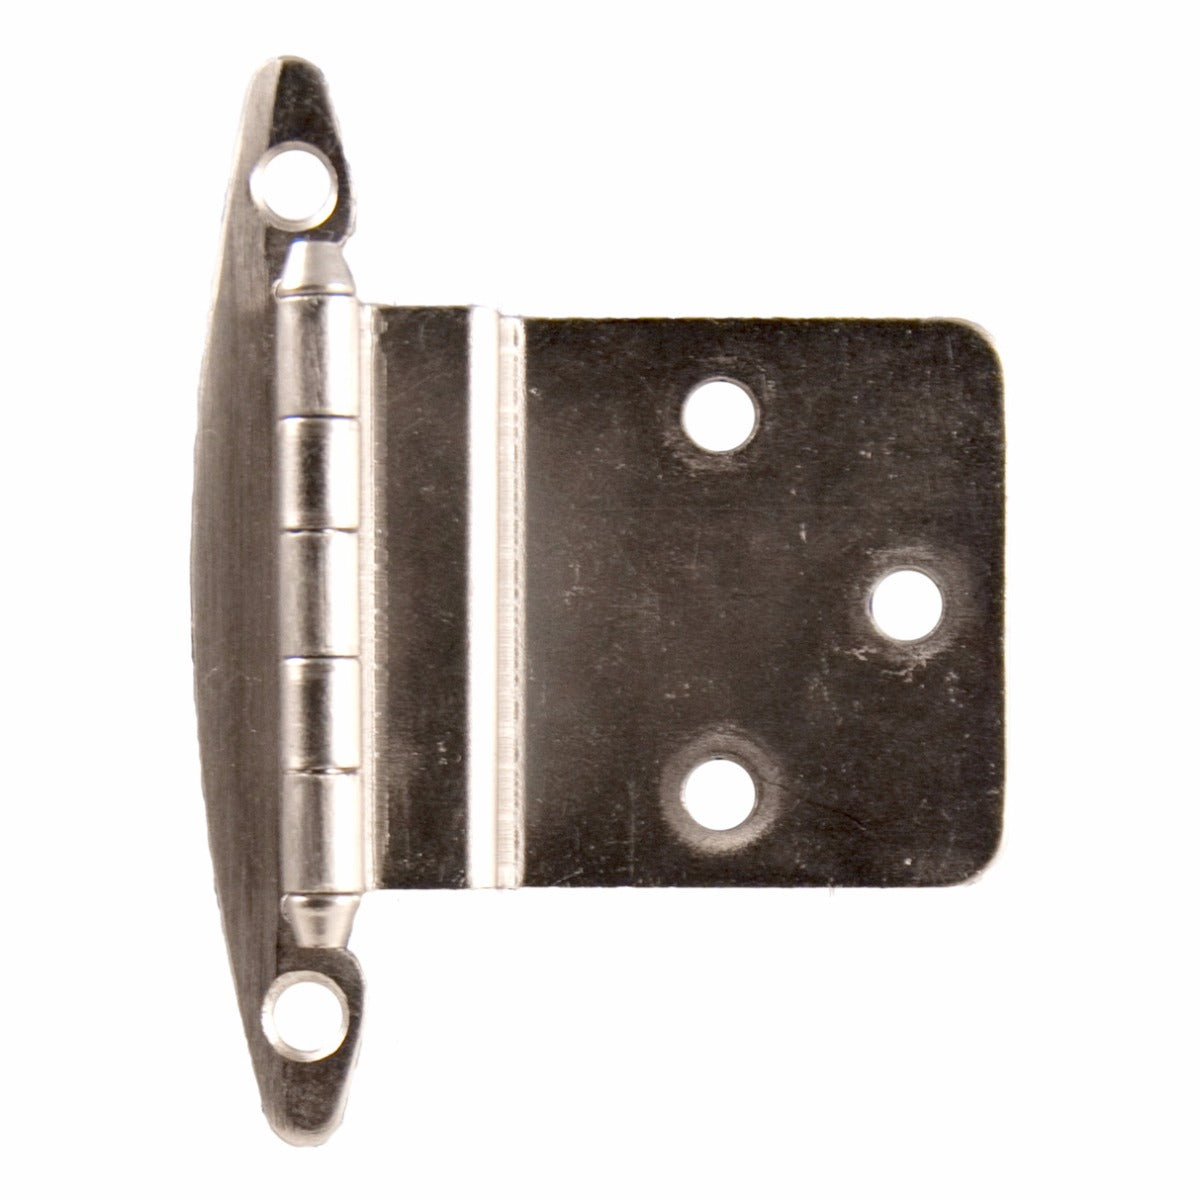 5/8" Partial Inset Cabinet Hinge